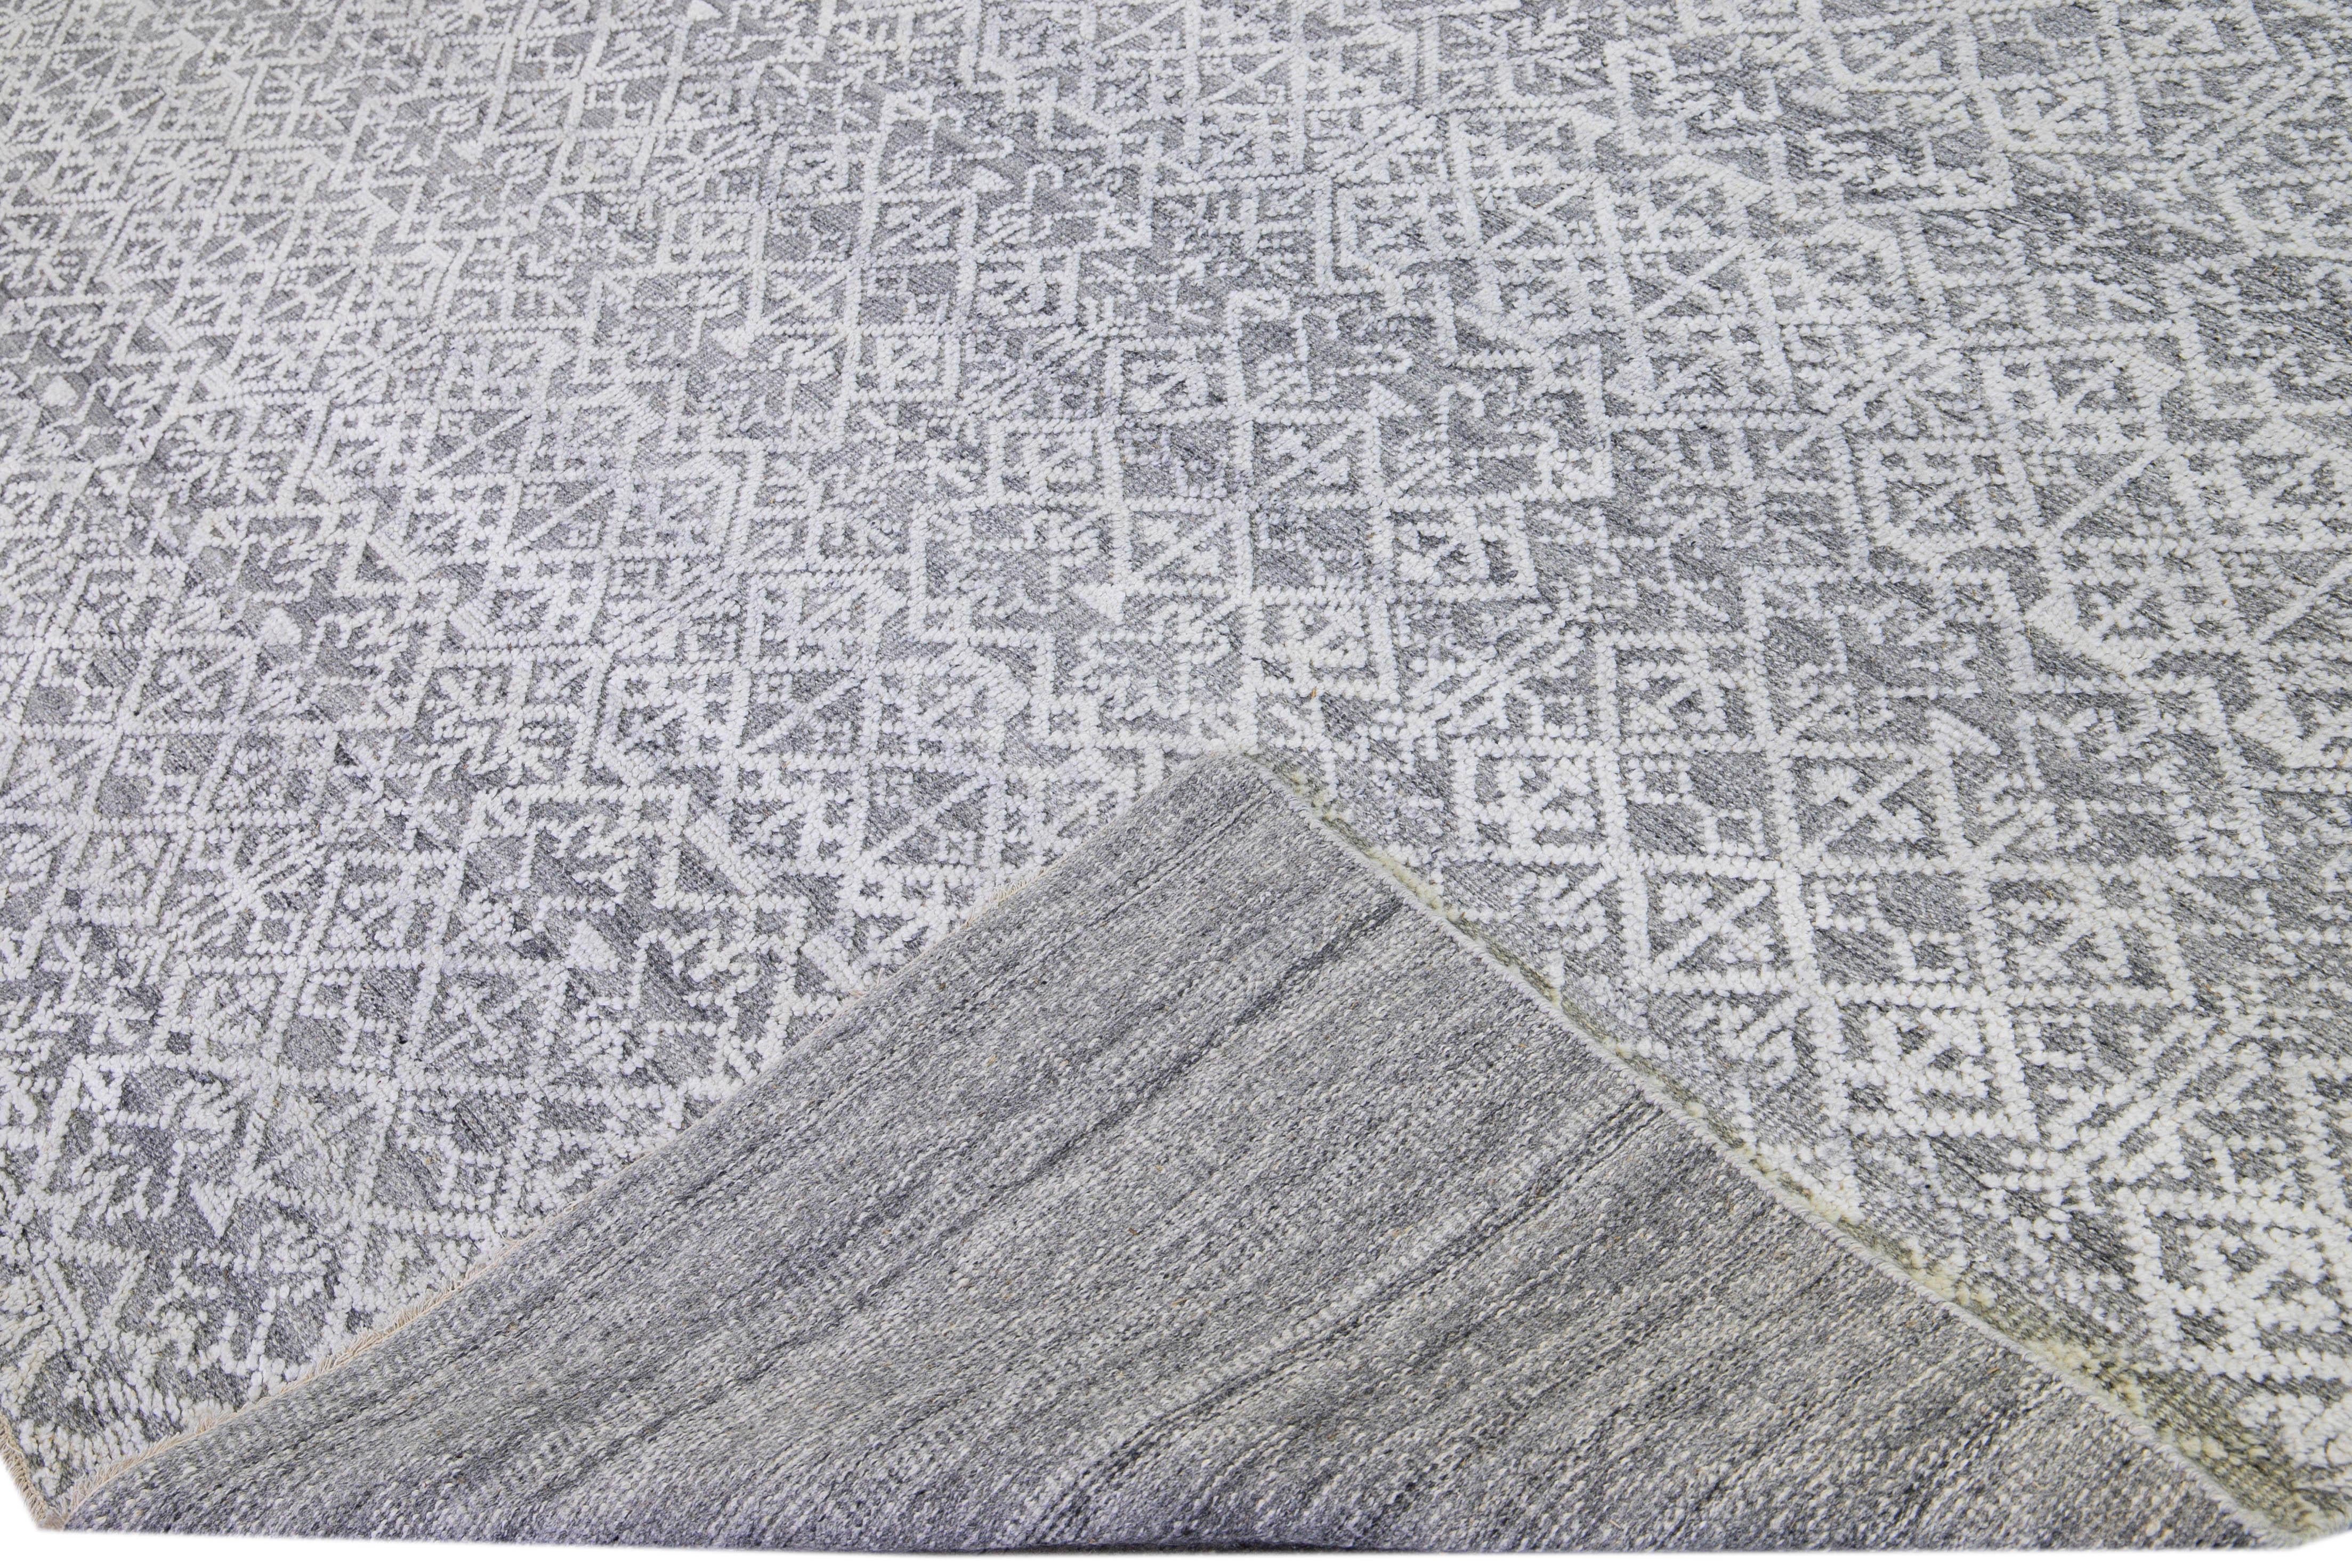 Beautiful modern hand-knotted wool rug with a gray field. This Transitional rug has an Ivory accent to create a modern, geometric pattern design with a mid-century look. 

This rug measures: 12' x 14'9